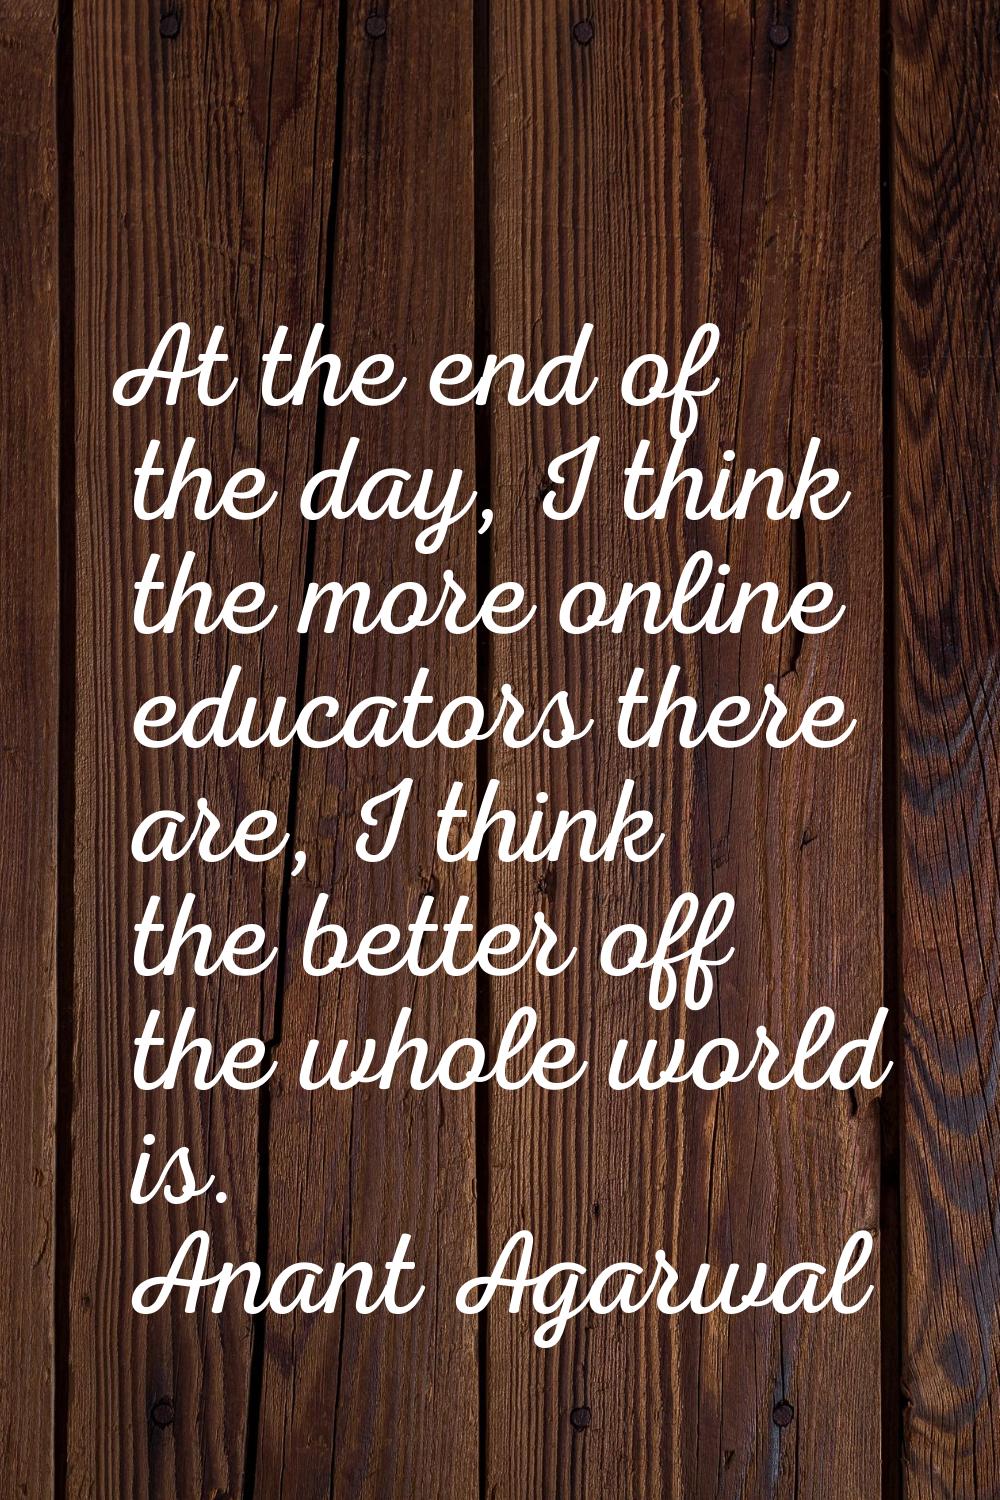 At the end of the day, I think the more online educators there are, I think the better off the whol